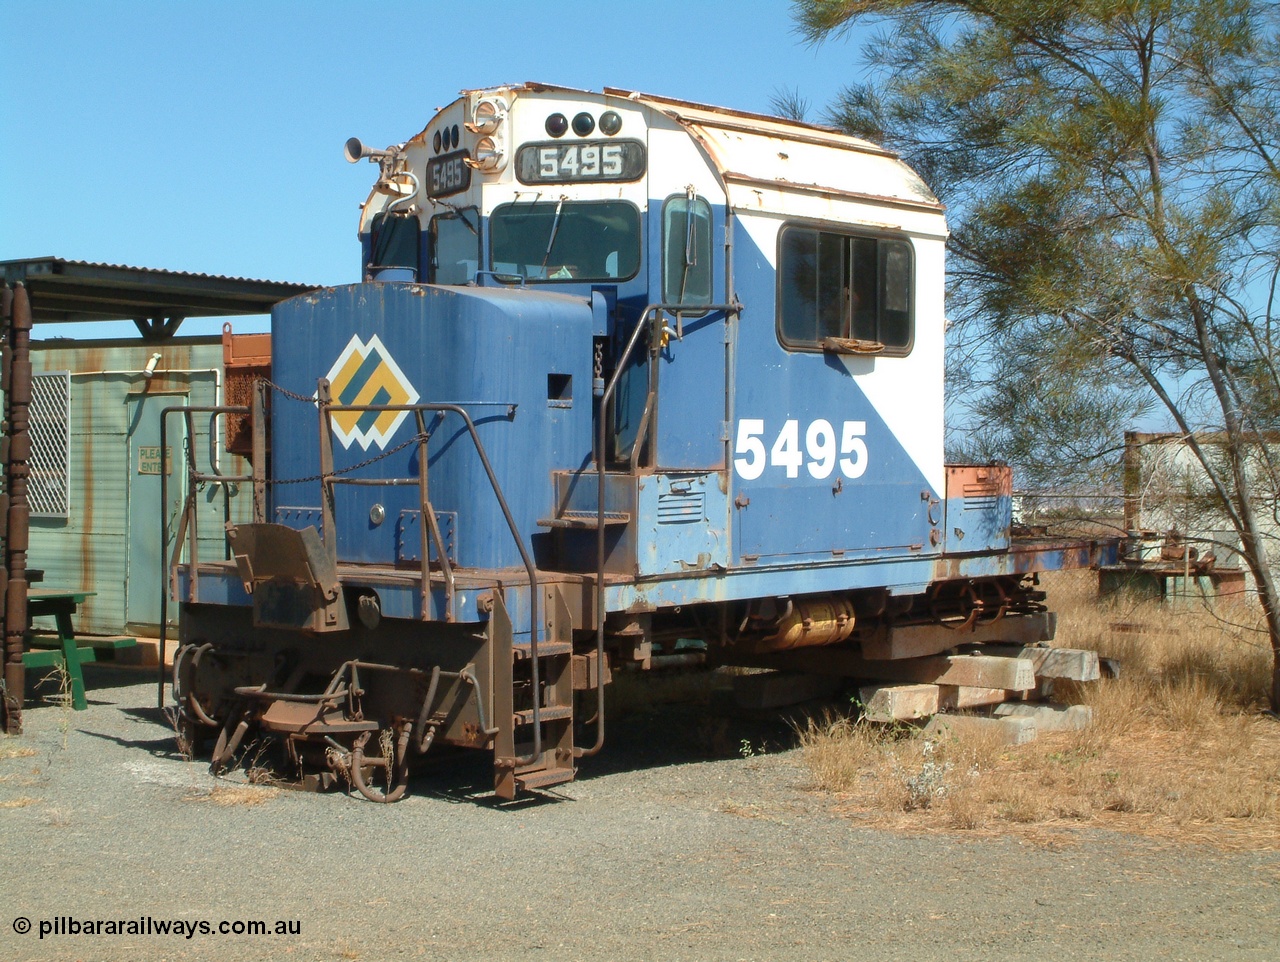 050109 093041
Pilbara Railways Historical Society, the cab from scrapped Australian built ALCo MLW M636 model by Comeng NSW in November 1974 for Mt Newman Mining and BHP Iron Ore numbered 5495 serial number C6084-11. 9th October 2005.
Keywords: 5495;Comeng-NSW;MLW;ALCo;M636;C6084-11;